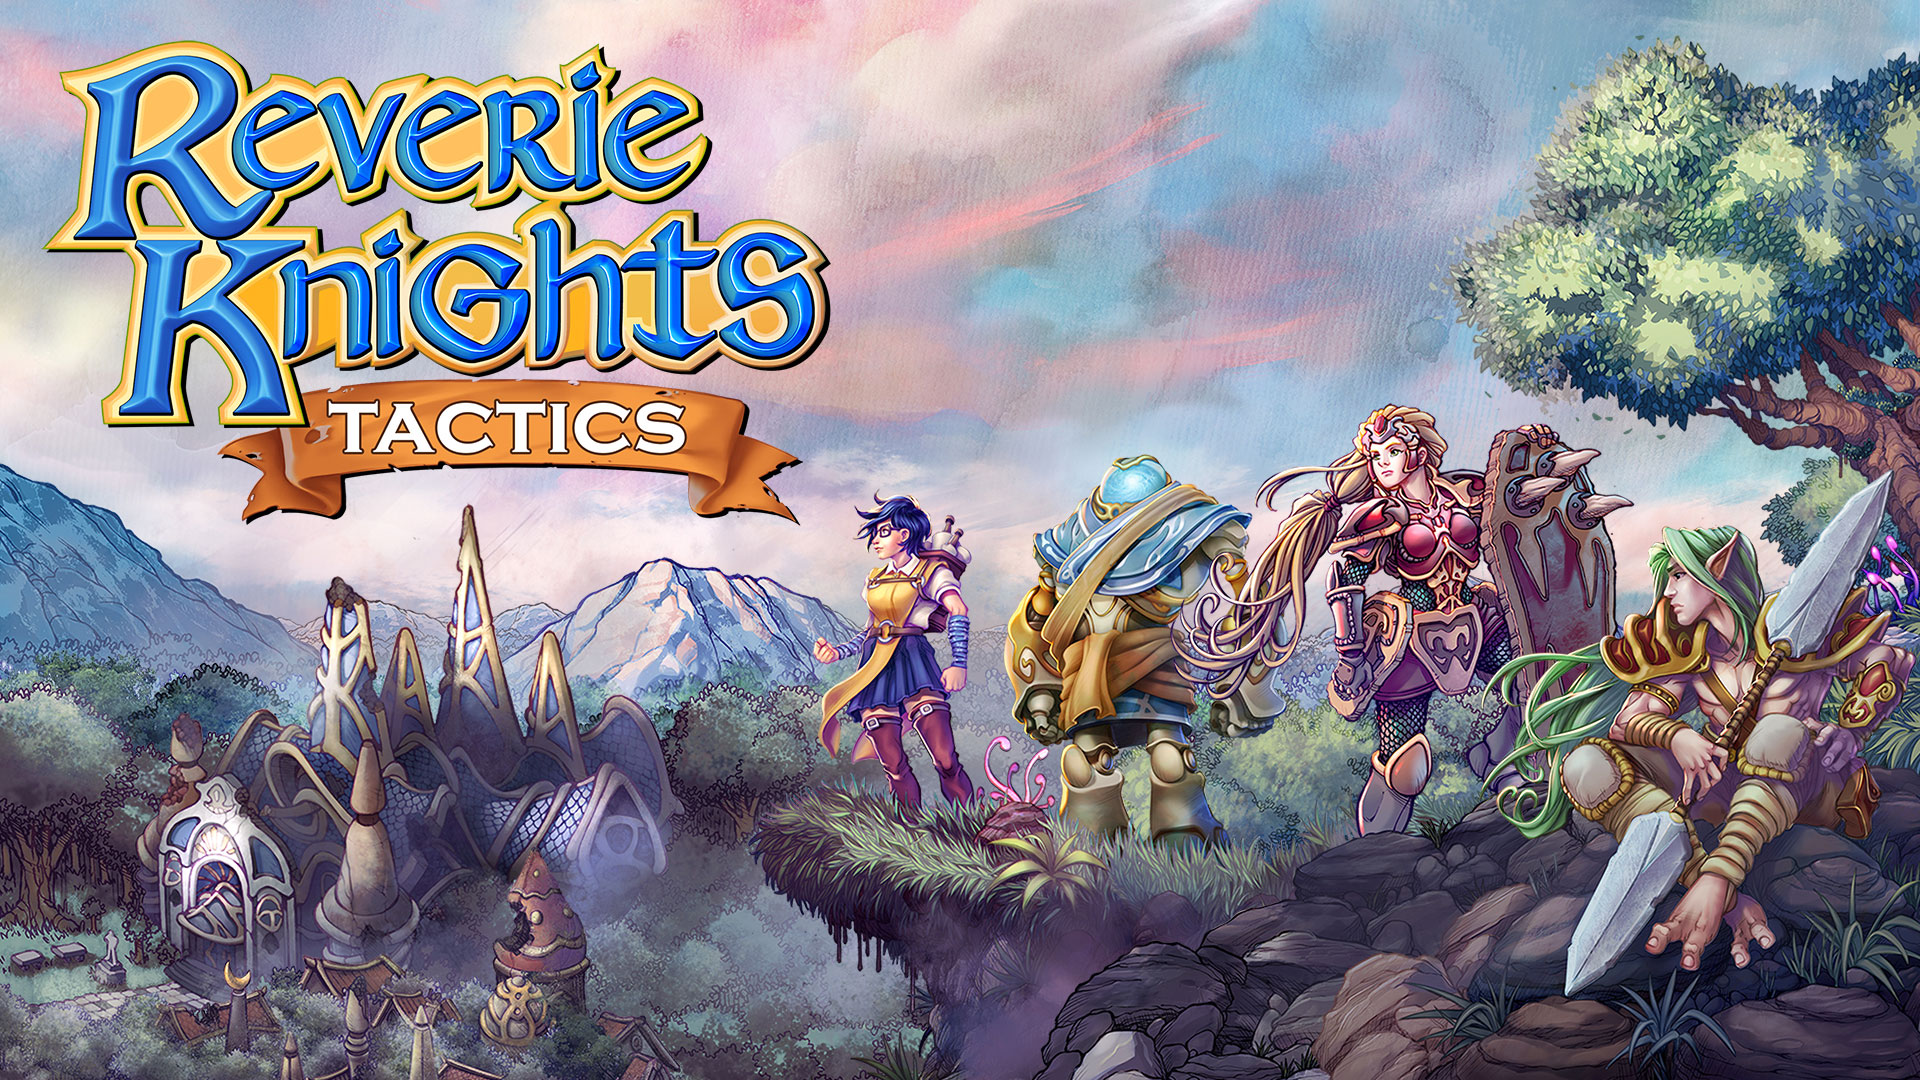 Video For The Art and Design of Reverie Knights Tactics